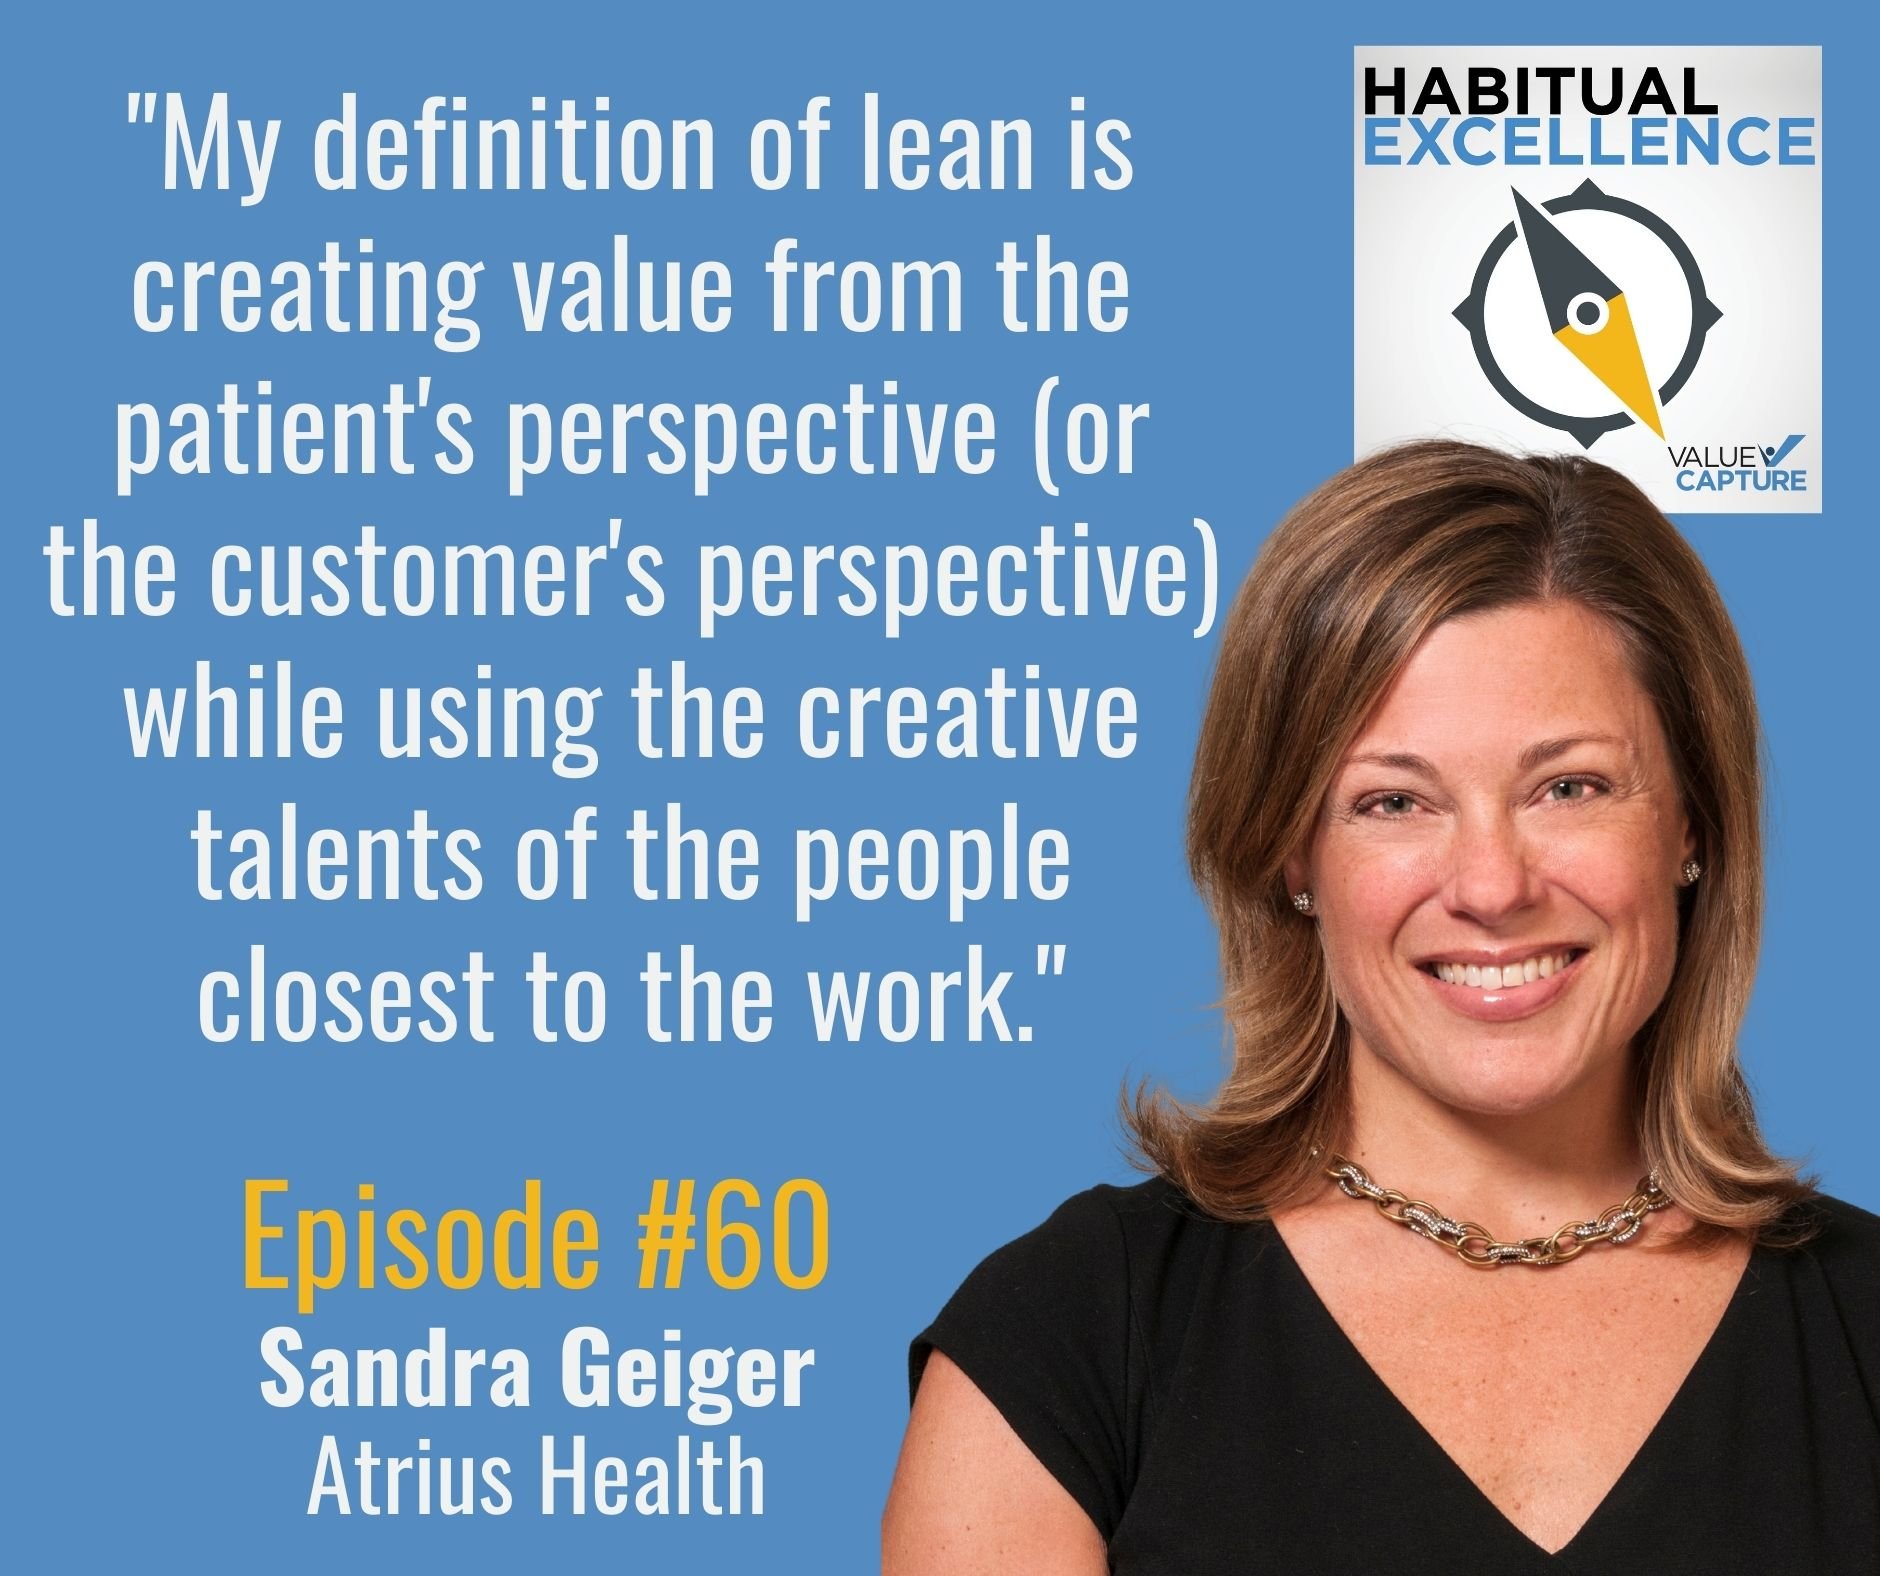 "My definition of lean is creating value from the patient's perspective (or the customer's perspective) while using the creative talents of the people closest to the work."